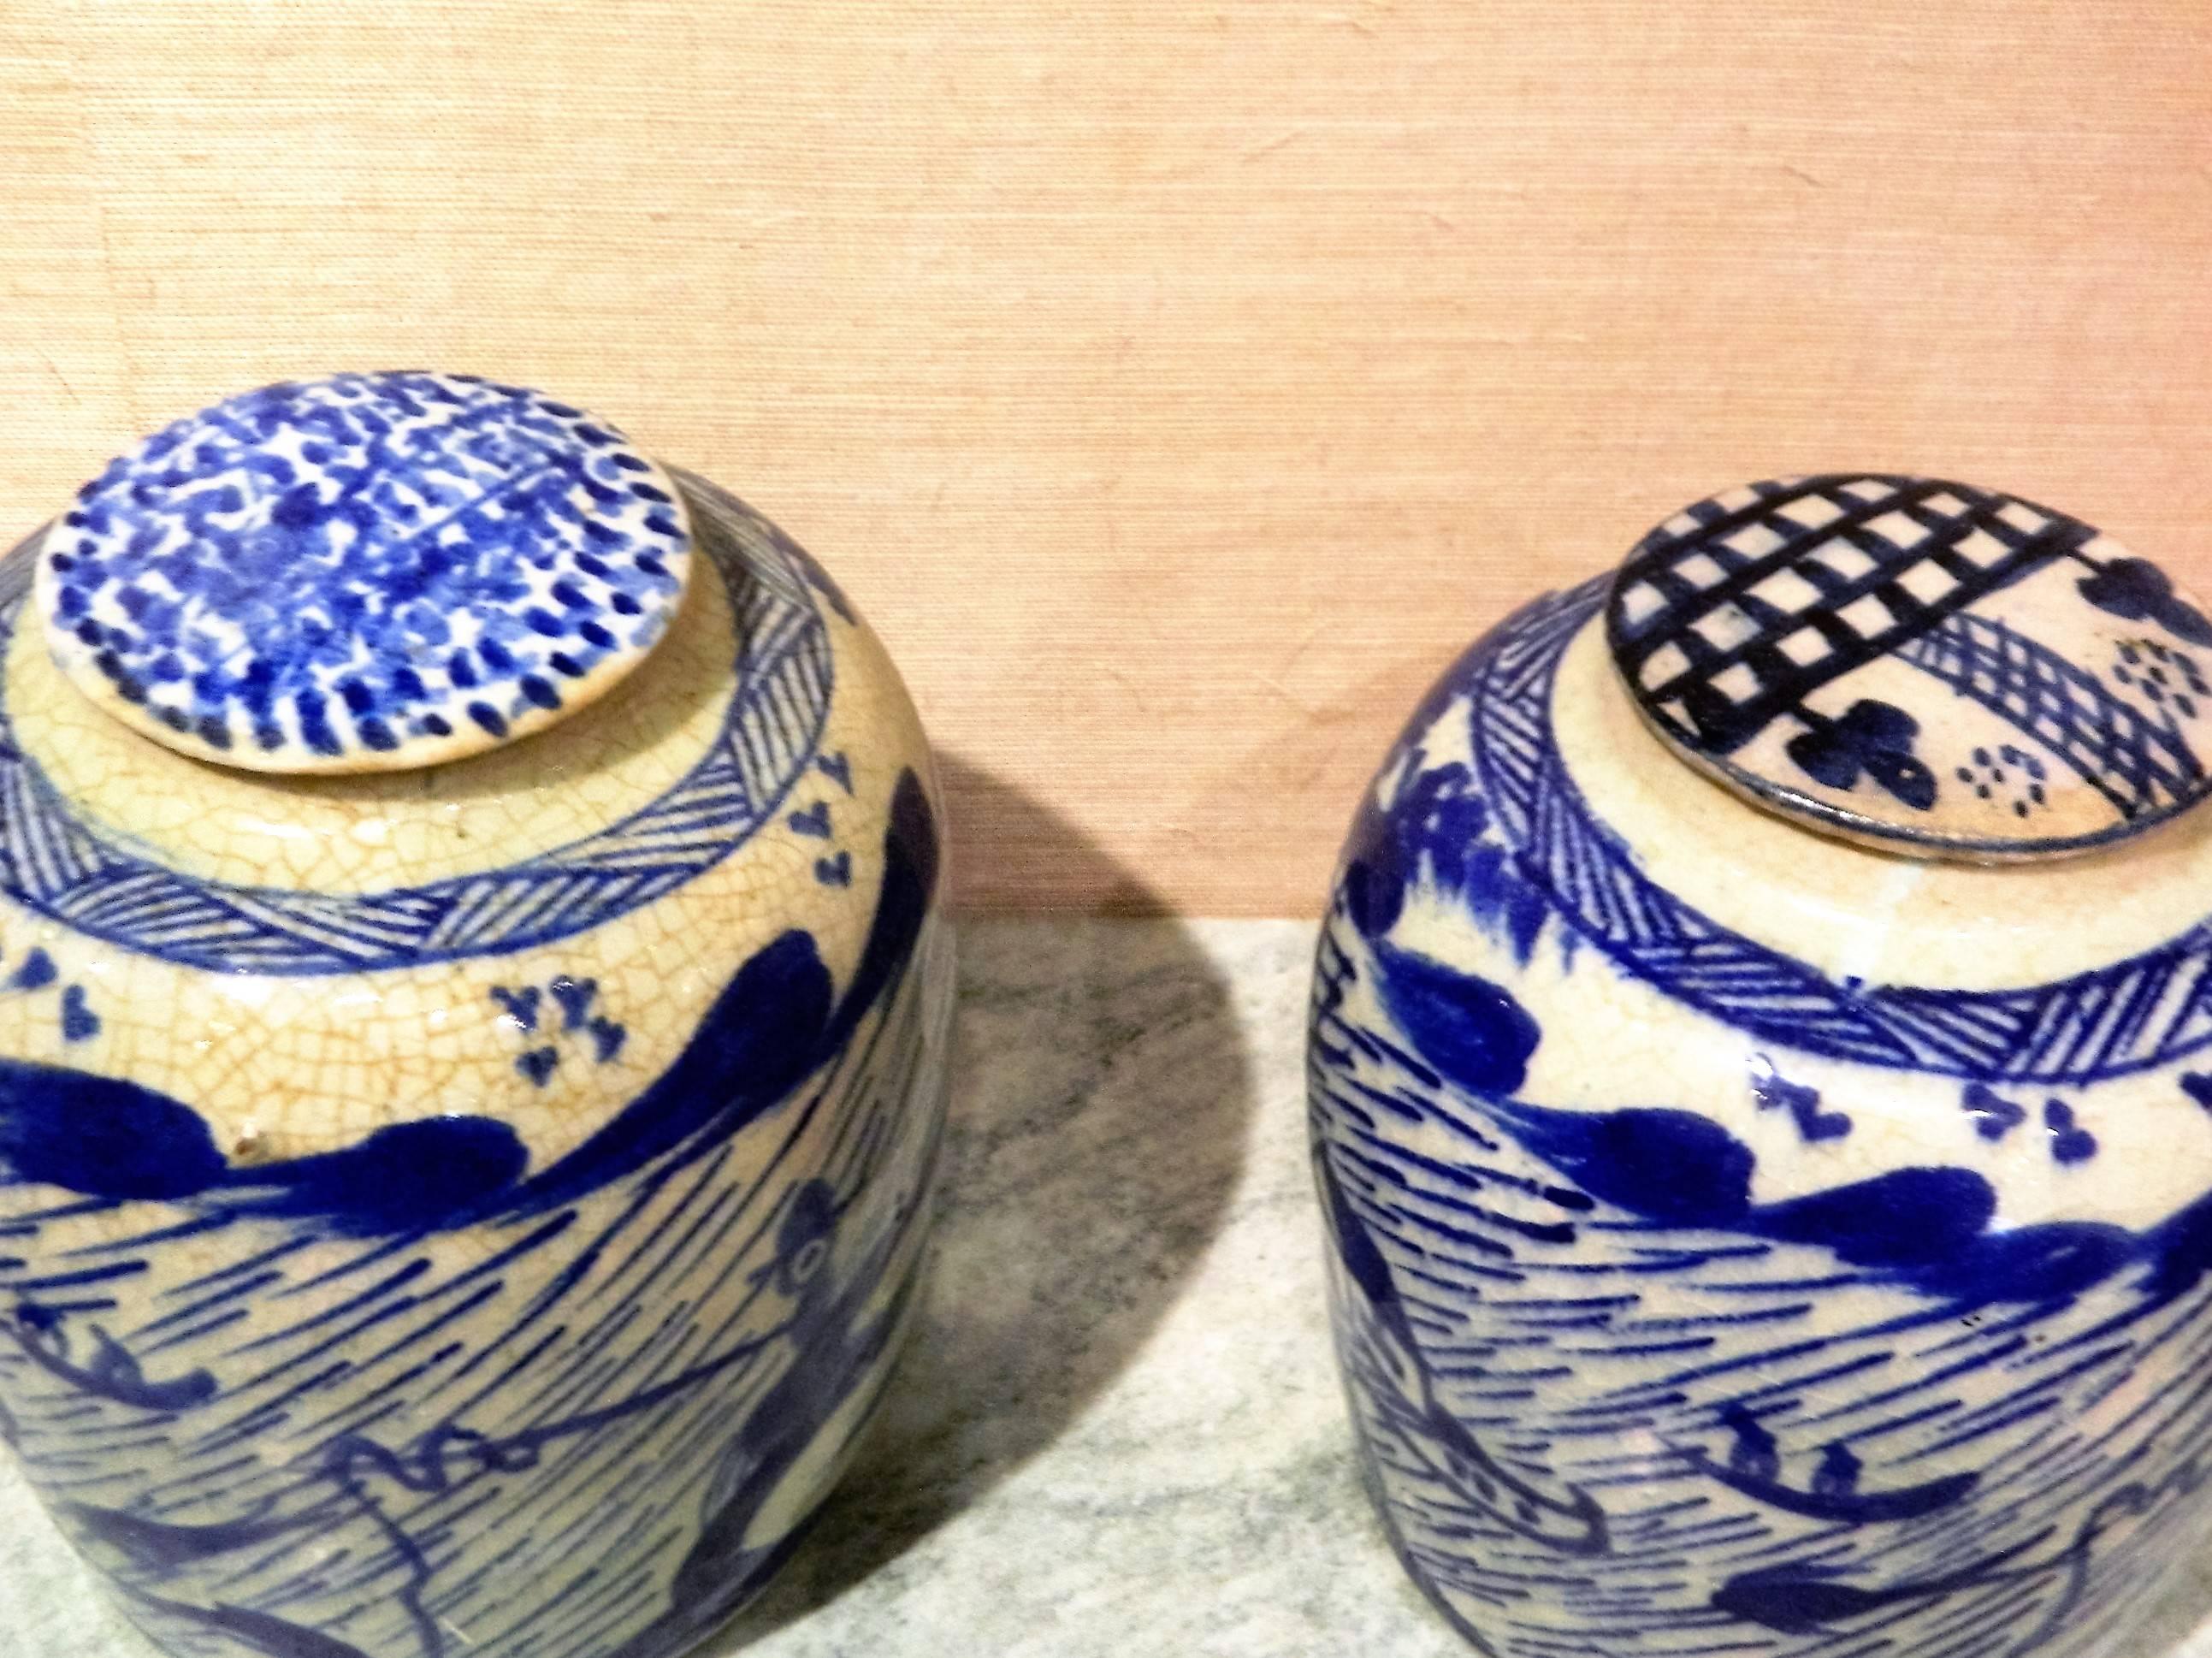 Porcelain Pair of Blue and White Chinese Ginger Jar with Lids, 20th Century